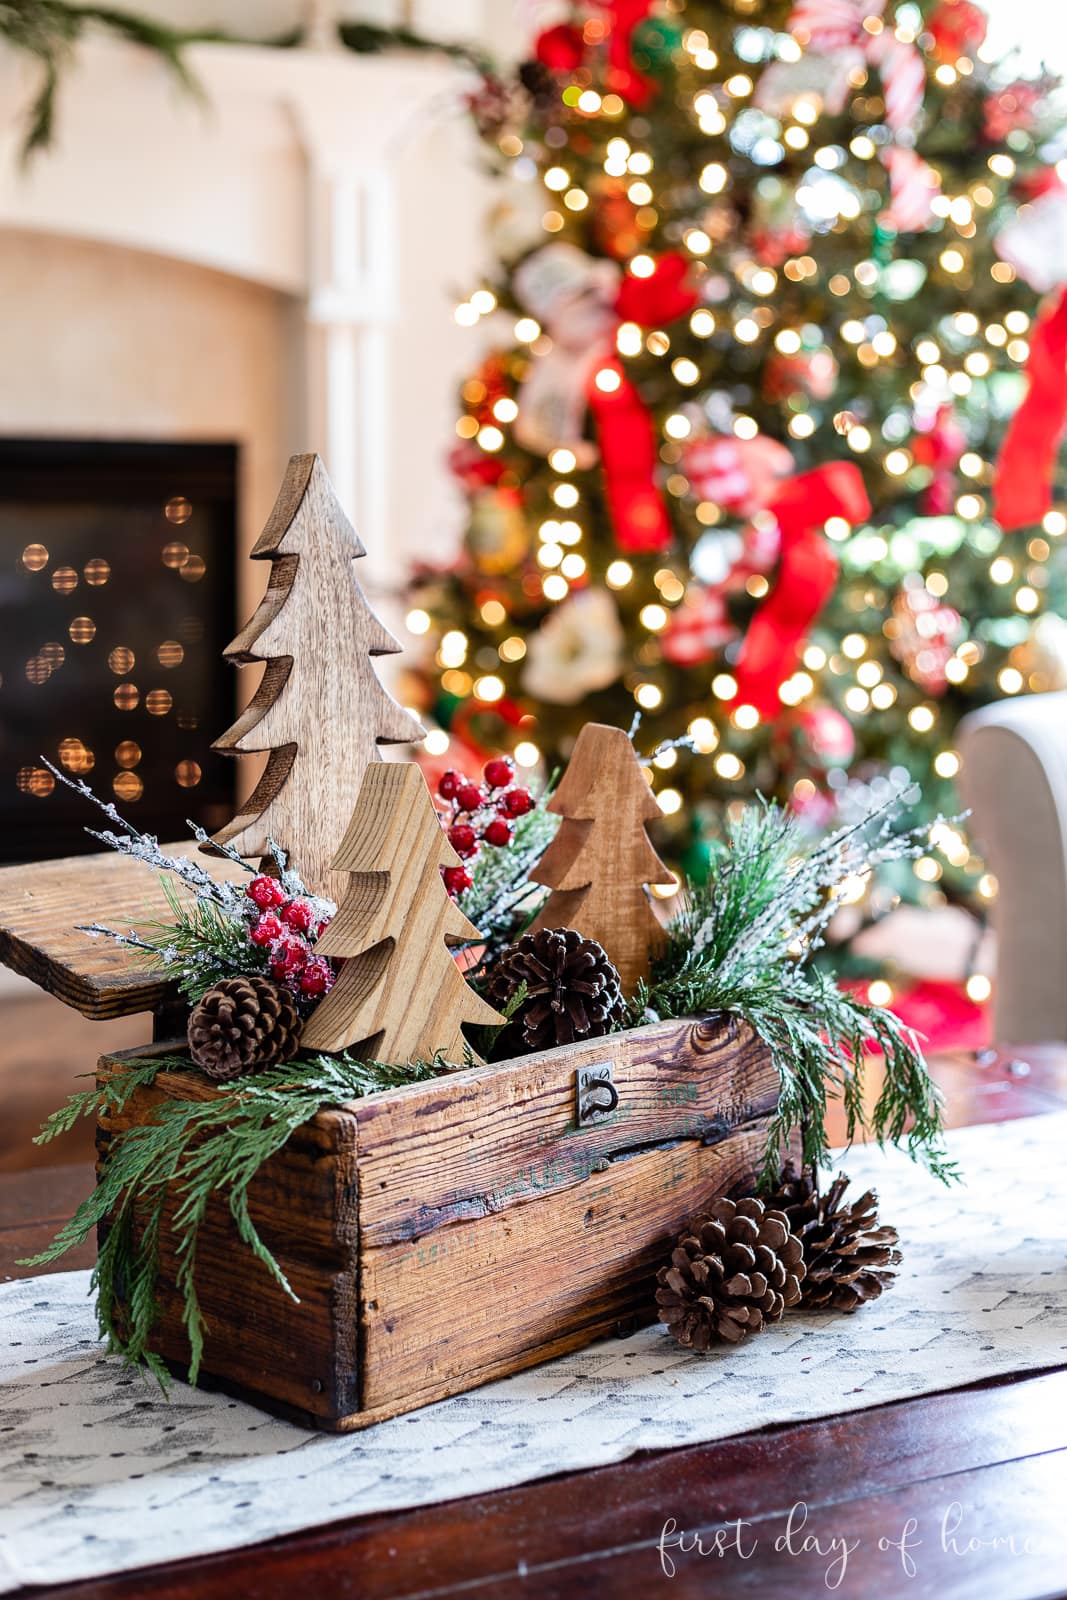 Christmas centerpiece with wooden crate, cedar garland and wooden trees